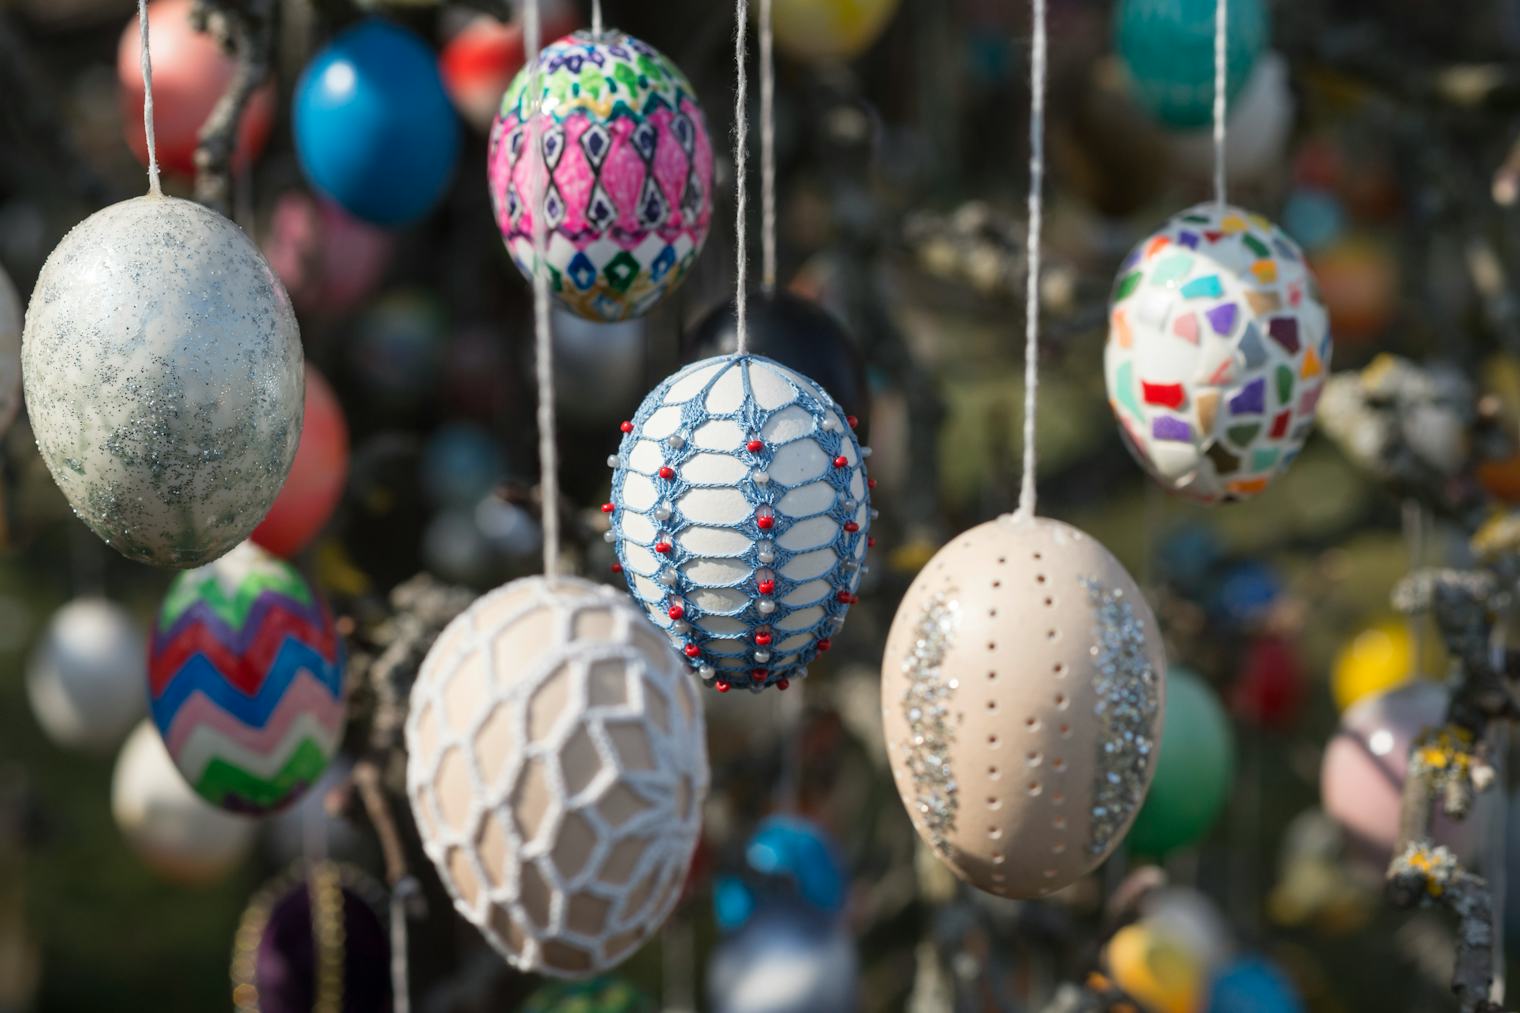 Why Do We Celebrate Easter? 5 Facts About This Holiday's Origins